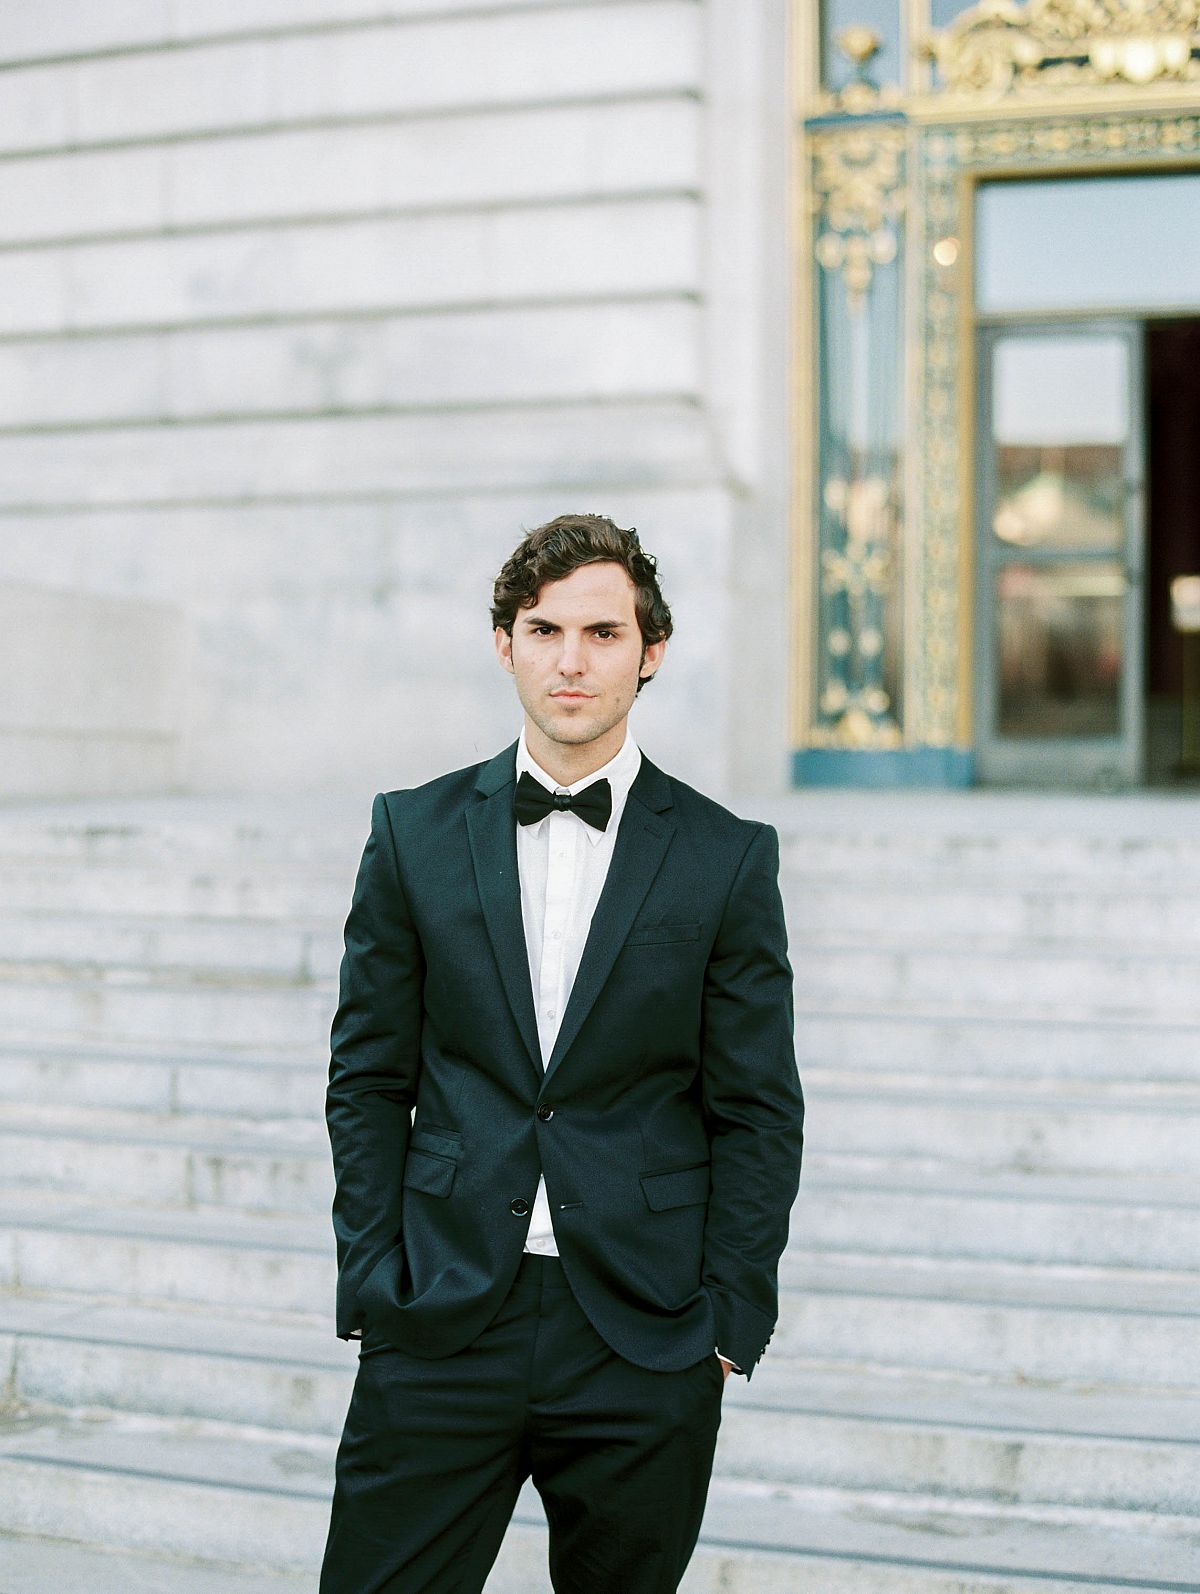 How a City Hall Elopement can be Stunning and Intimate